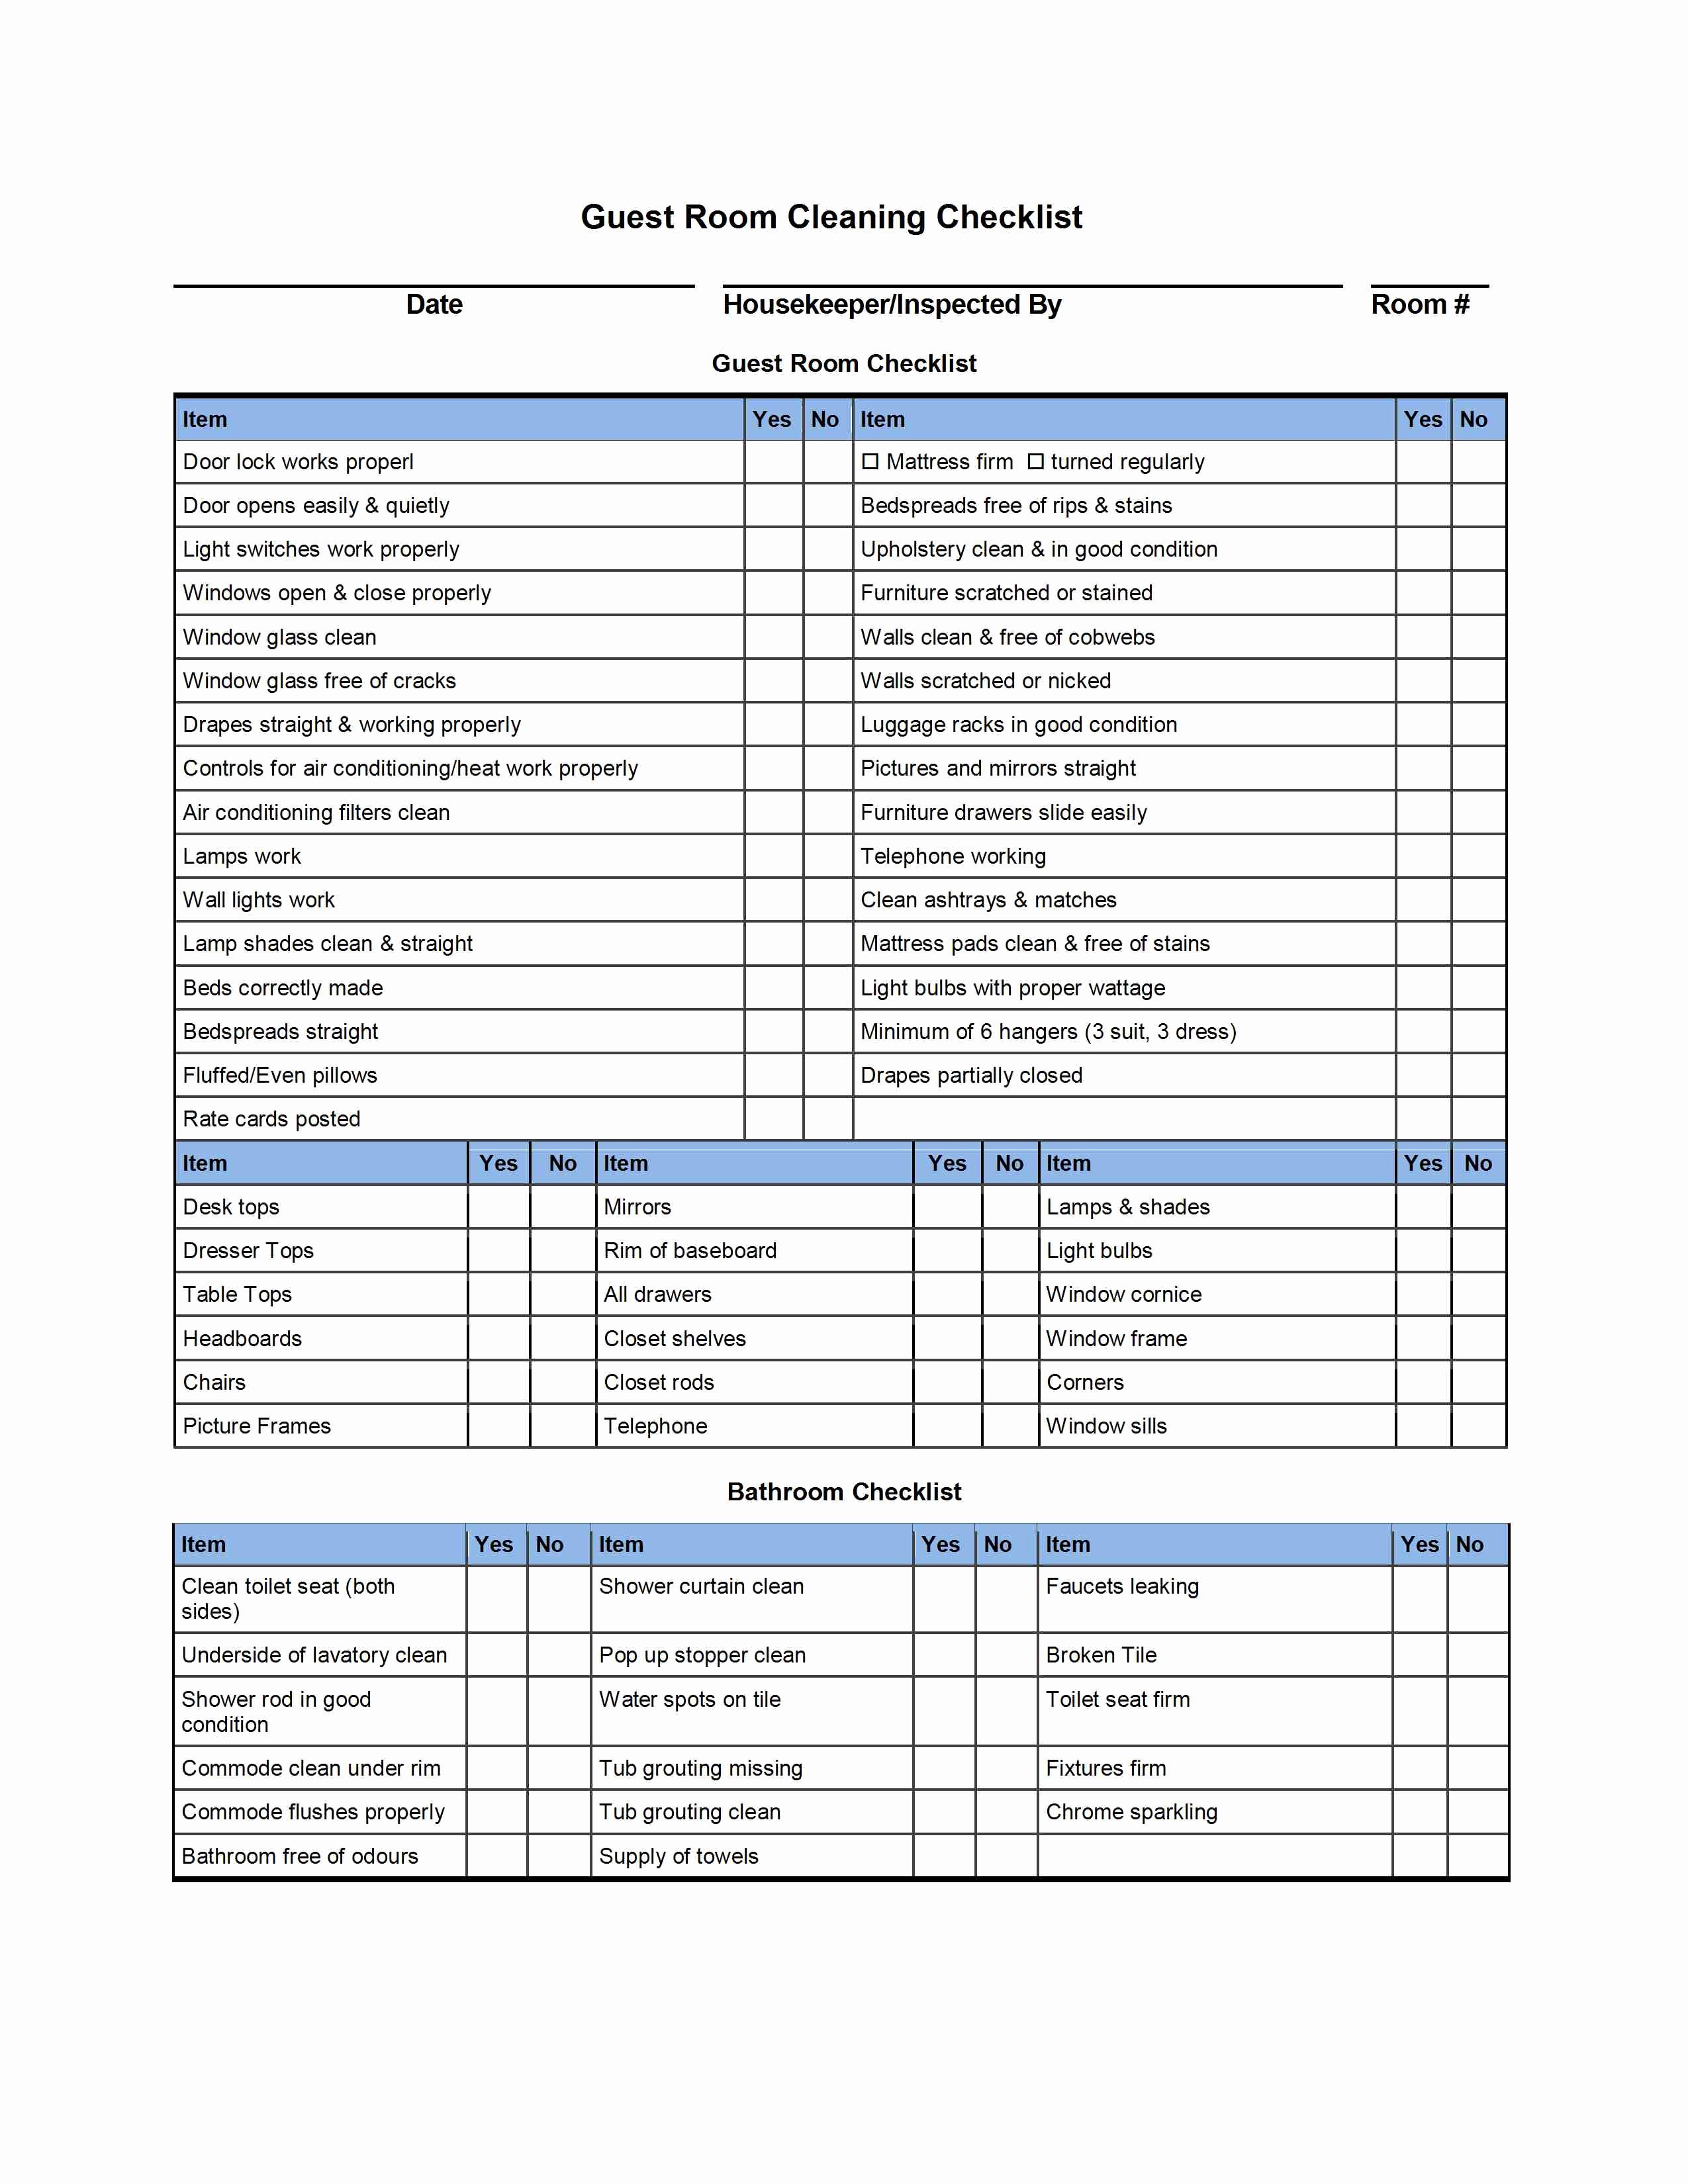 Cleaning Business Checklist Template Unique Guest Room Cleaning Checklist Template with Table